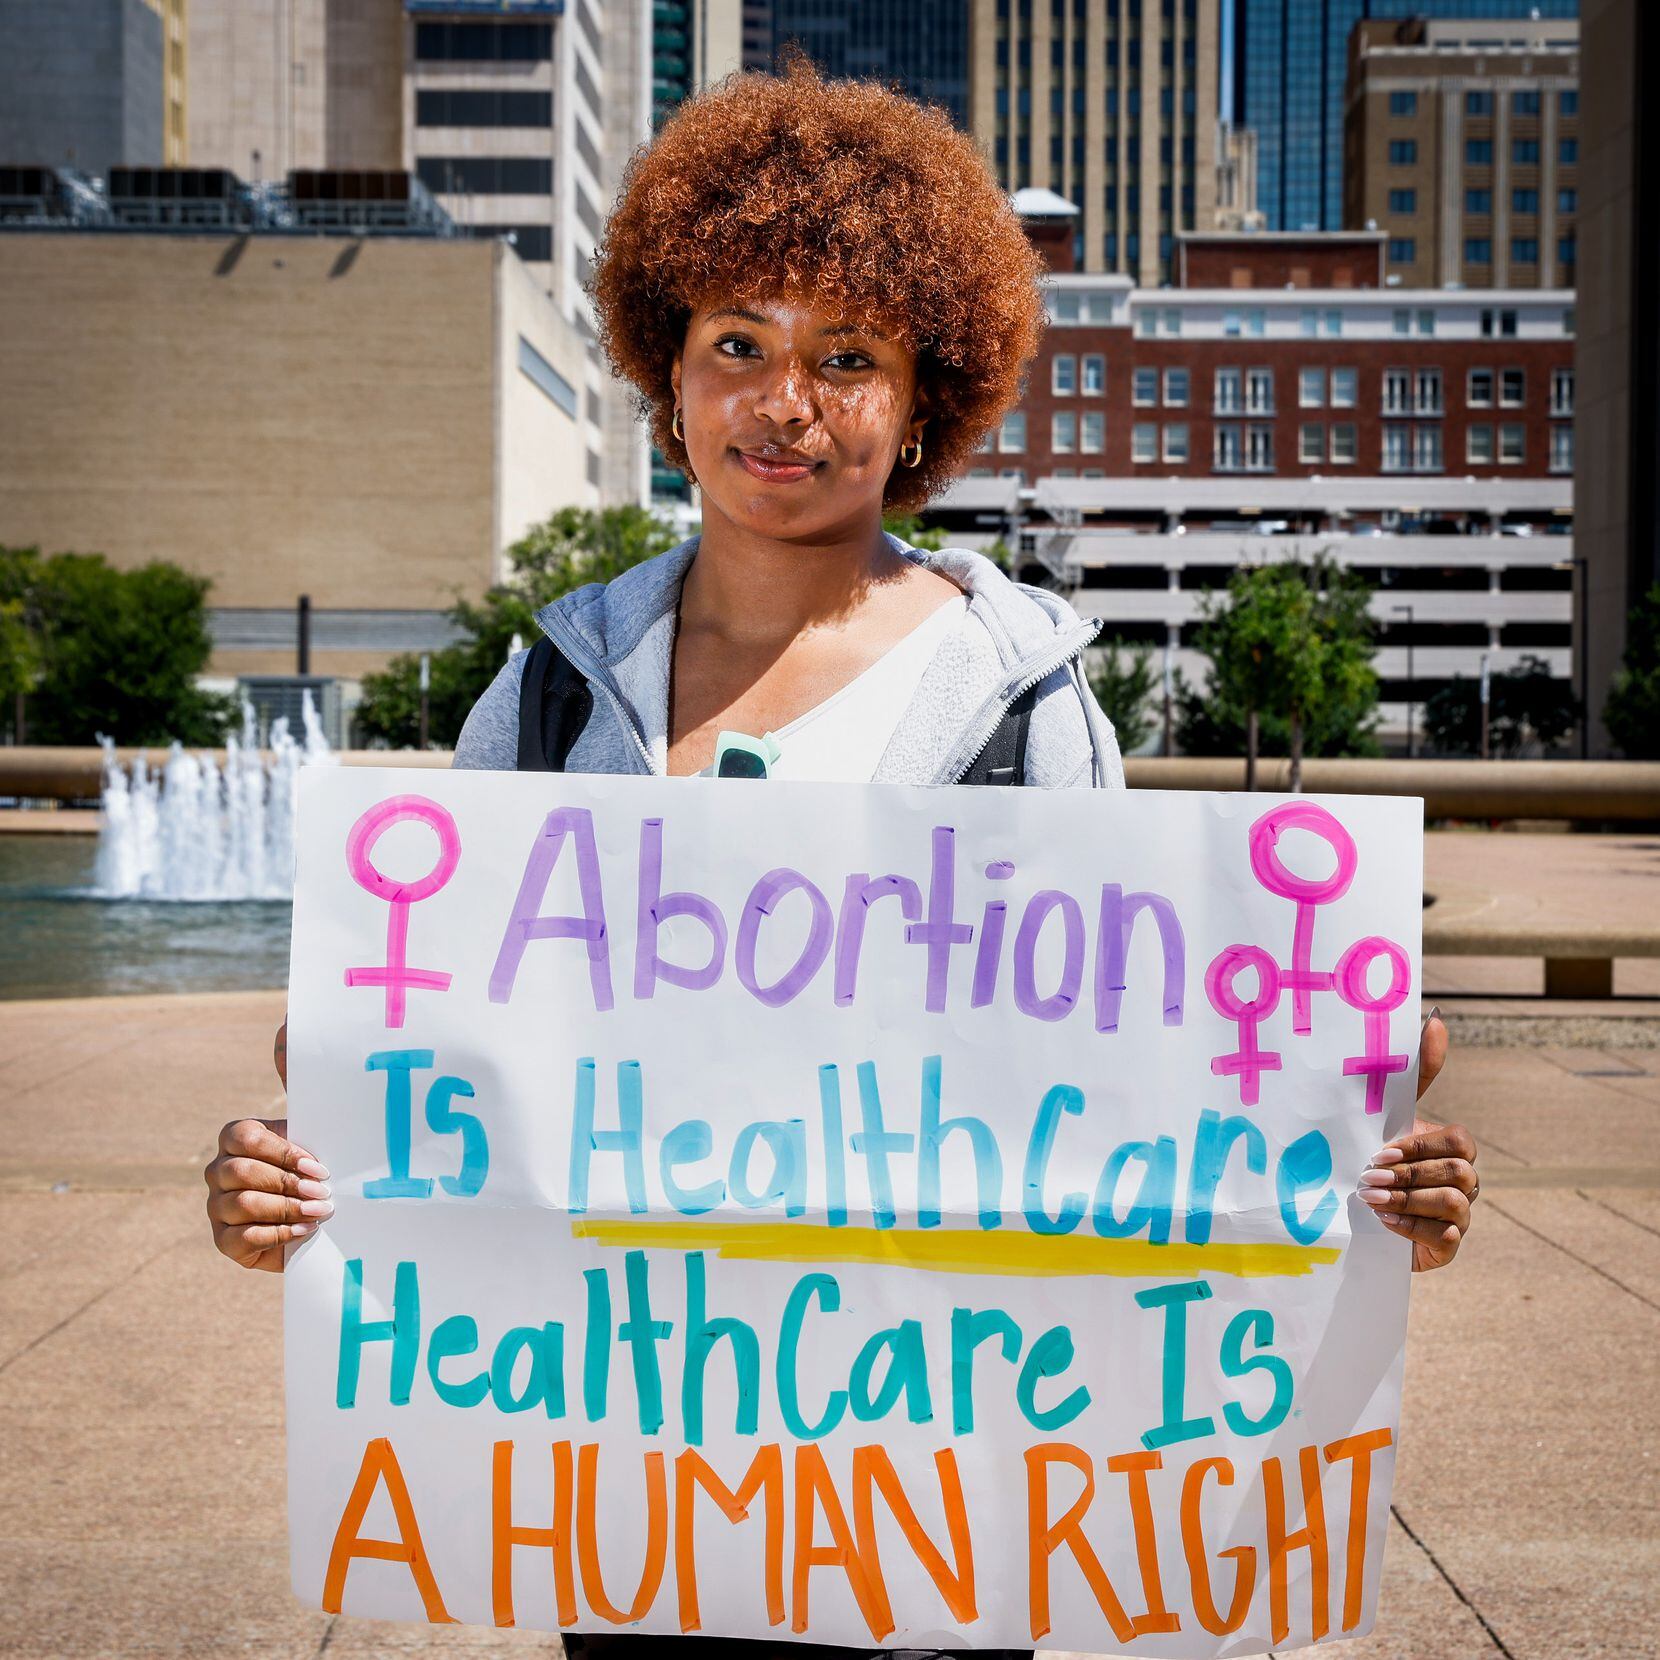 Kyjana Jordan, 19, from Dallas, Texas, poses for a portrait during an abortion rights...